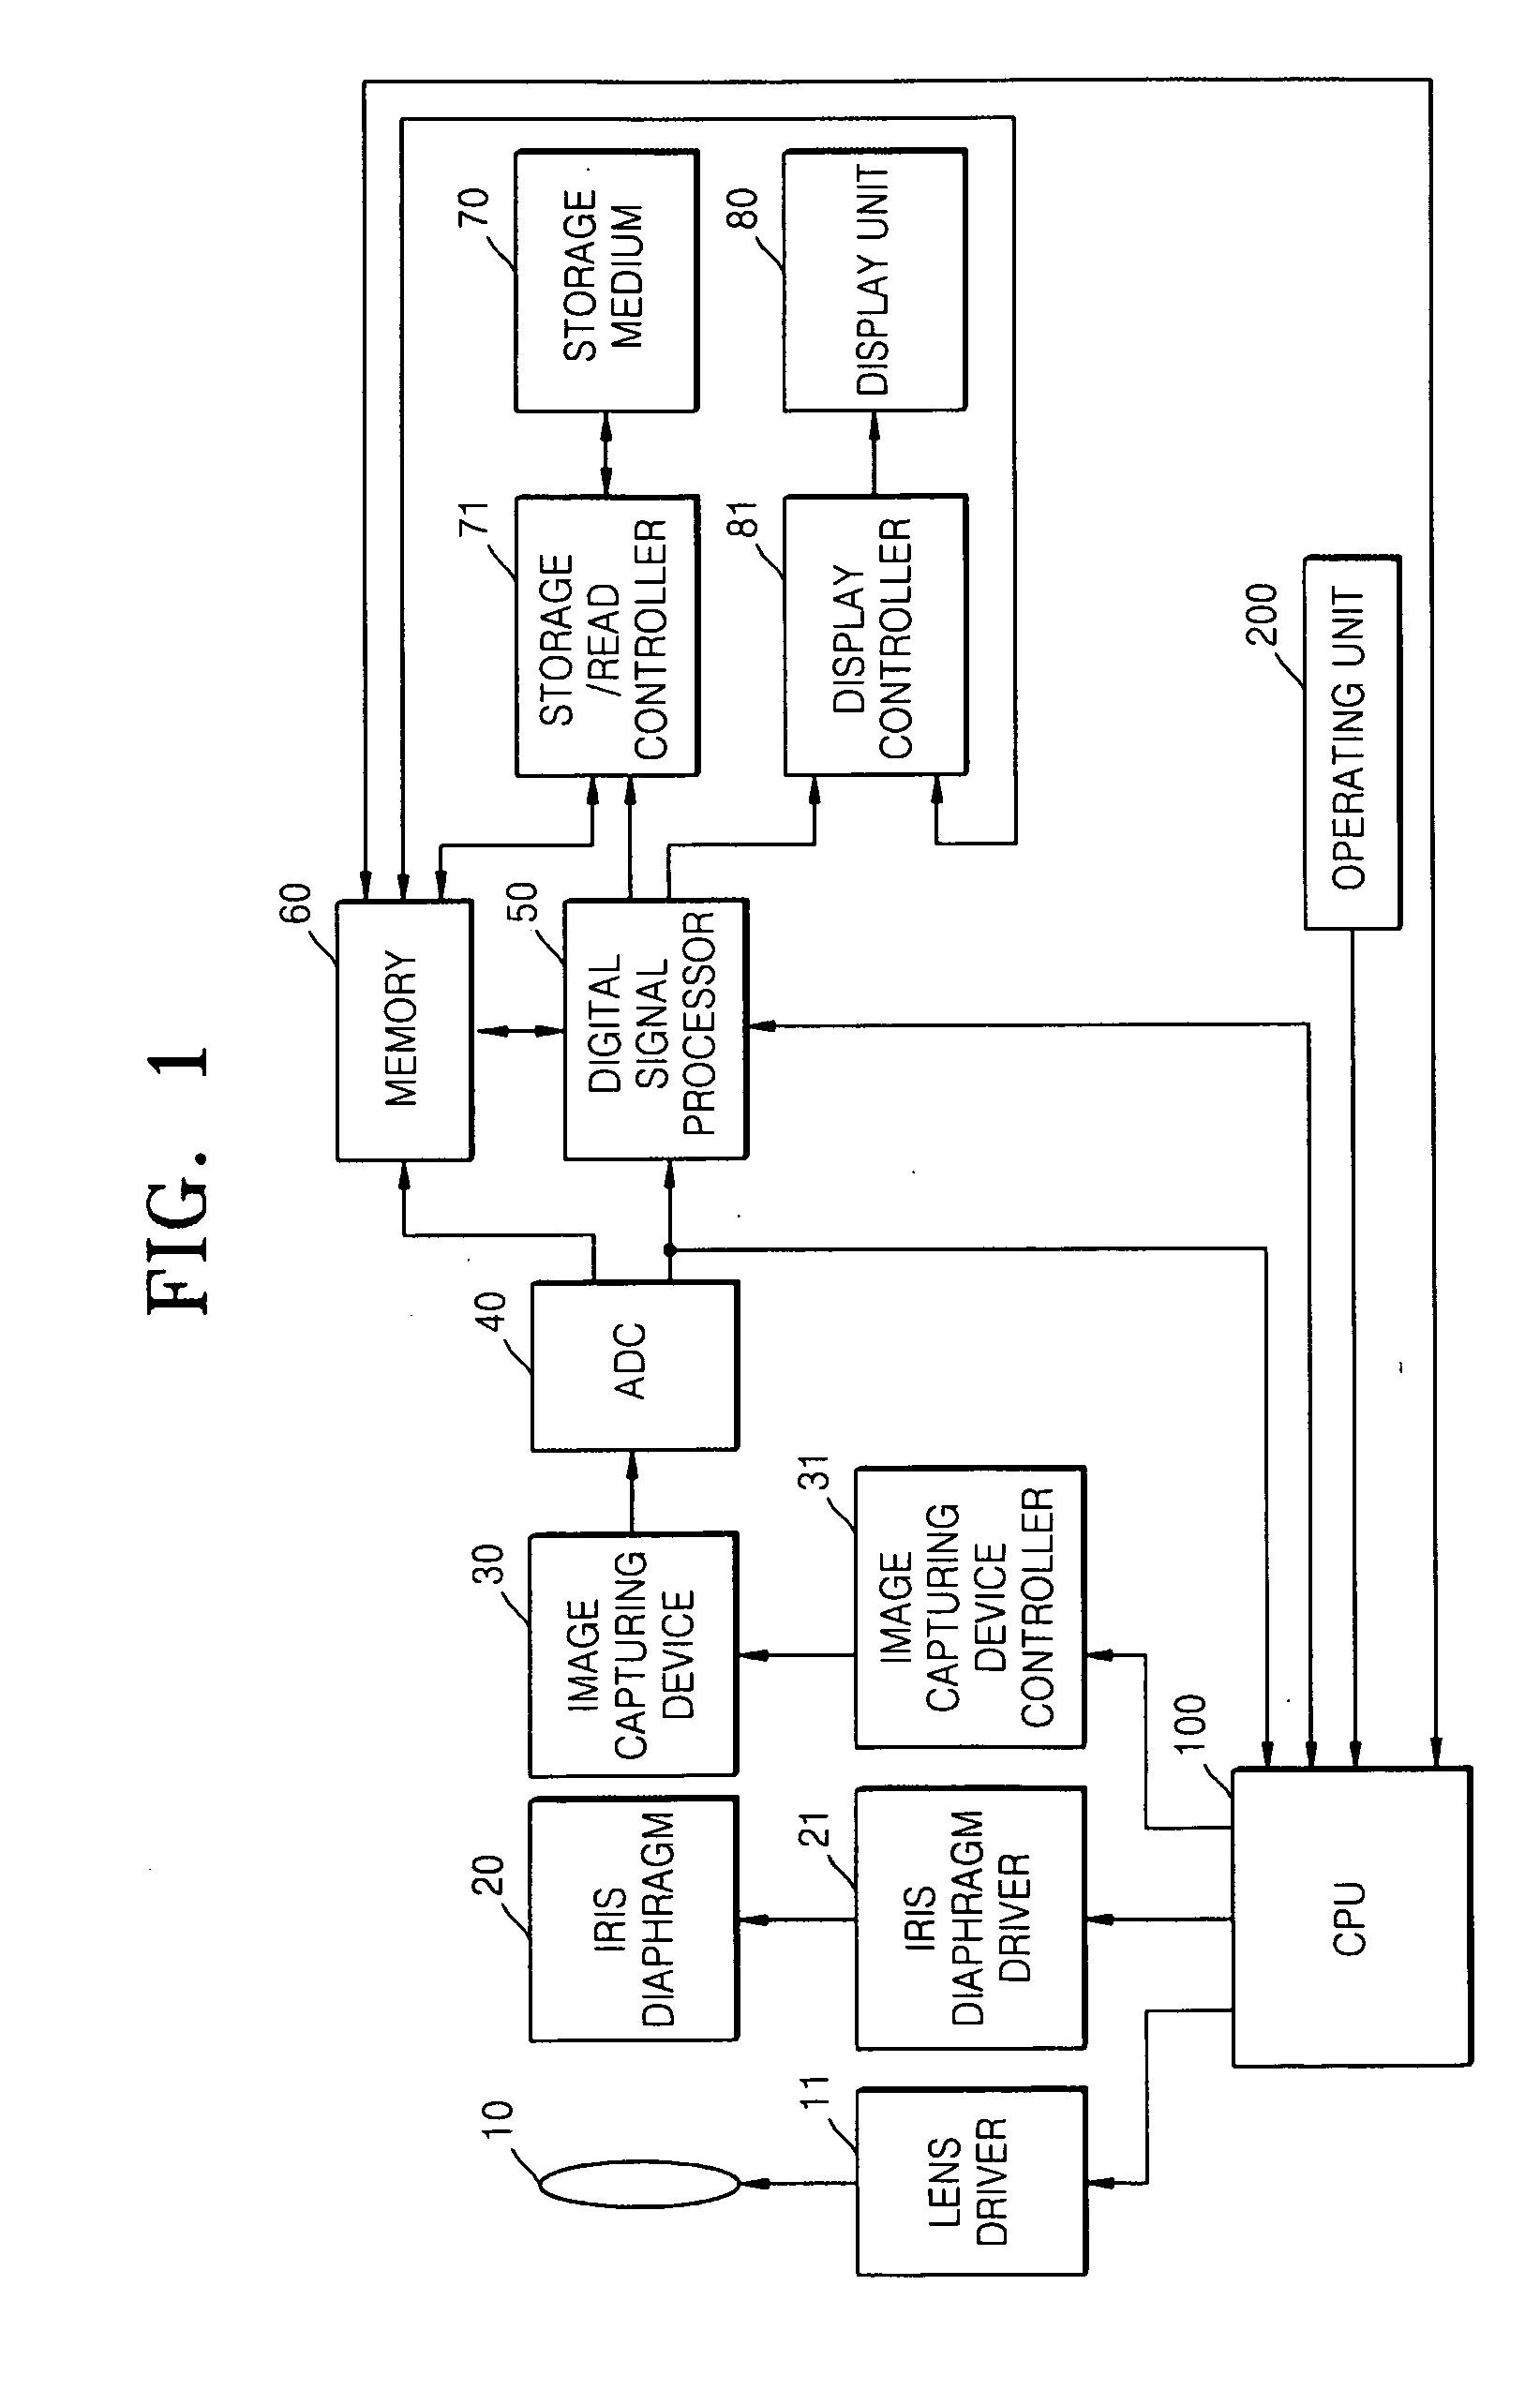 Digital image photographing apparatus, method of controlling the apparatus, and recording medium having program for executing the method